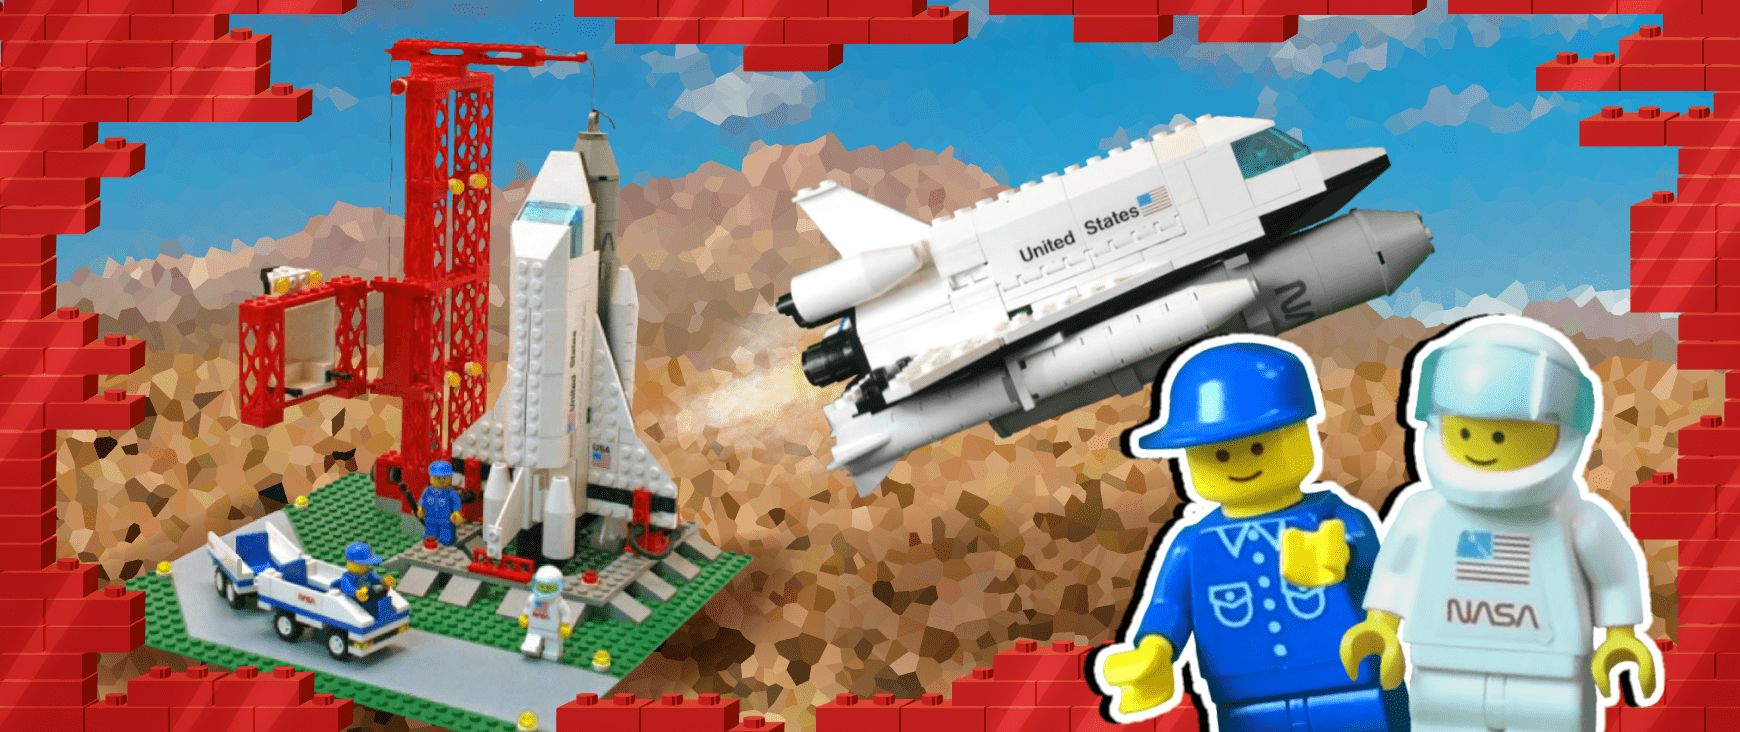 Space Shutter Launch Lego set from 1990